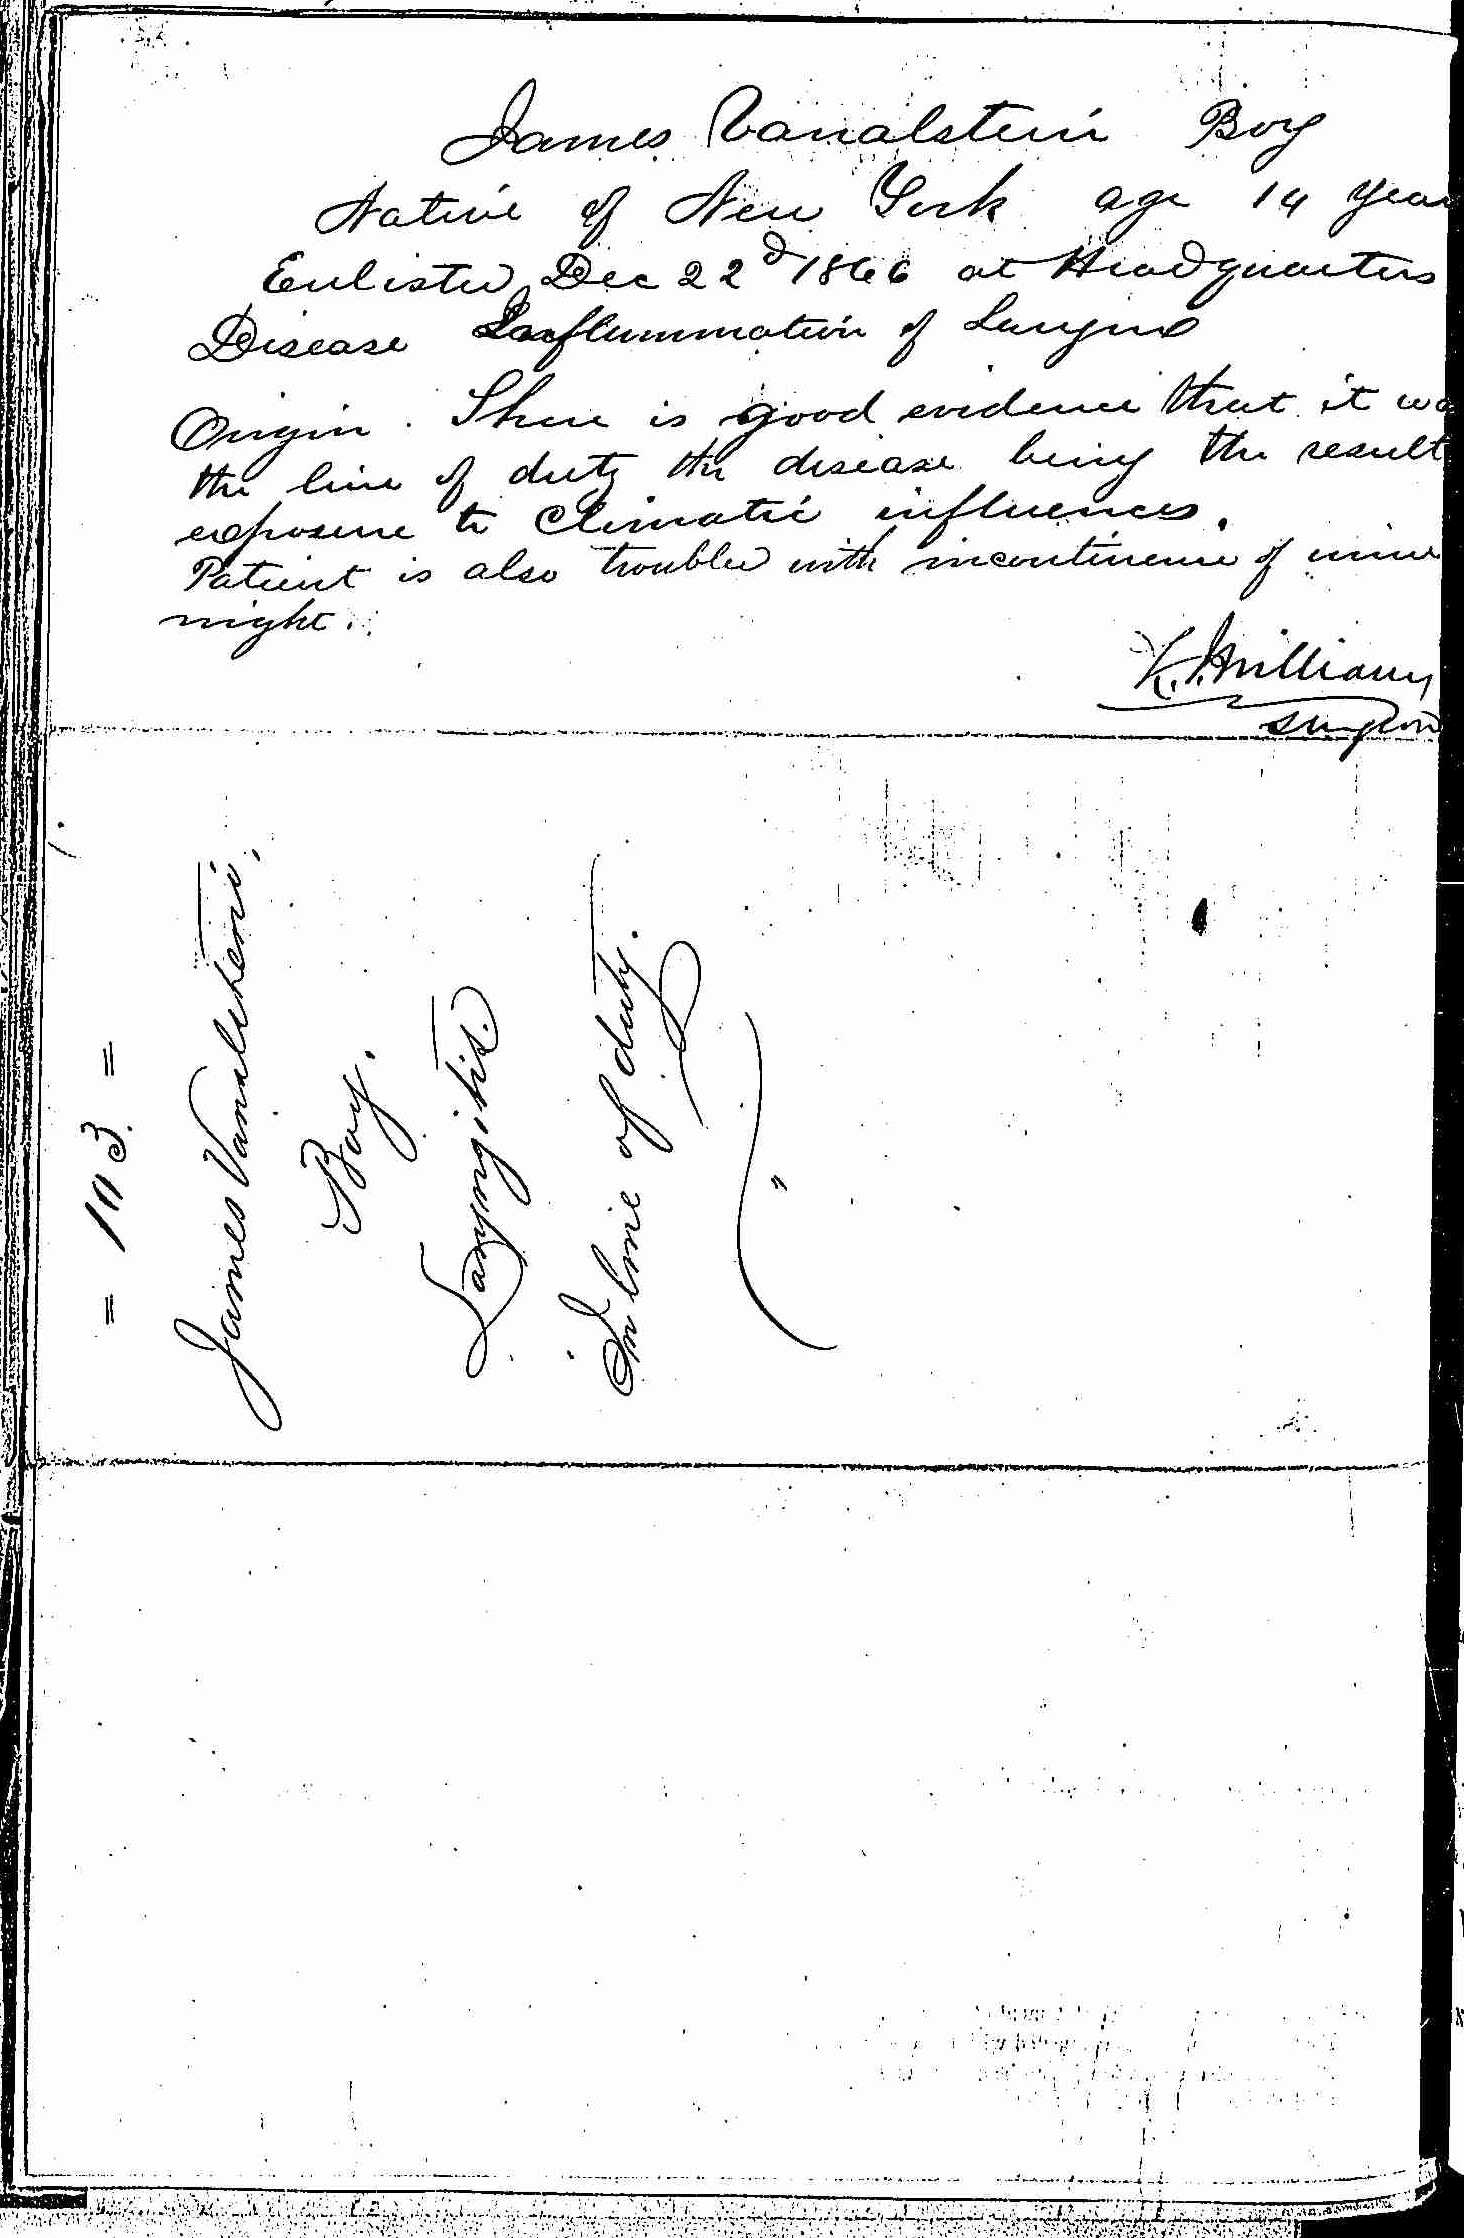 Entry for James Vanalstein (page 2 of 2) in the log Hospital Tickets and Case Papers - Naval Hospital - Washington, D.C. - 1866-68